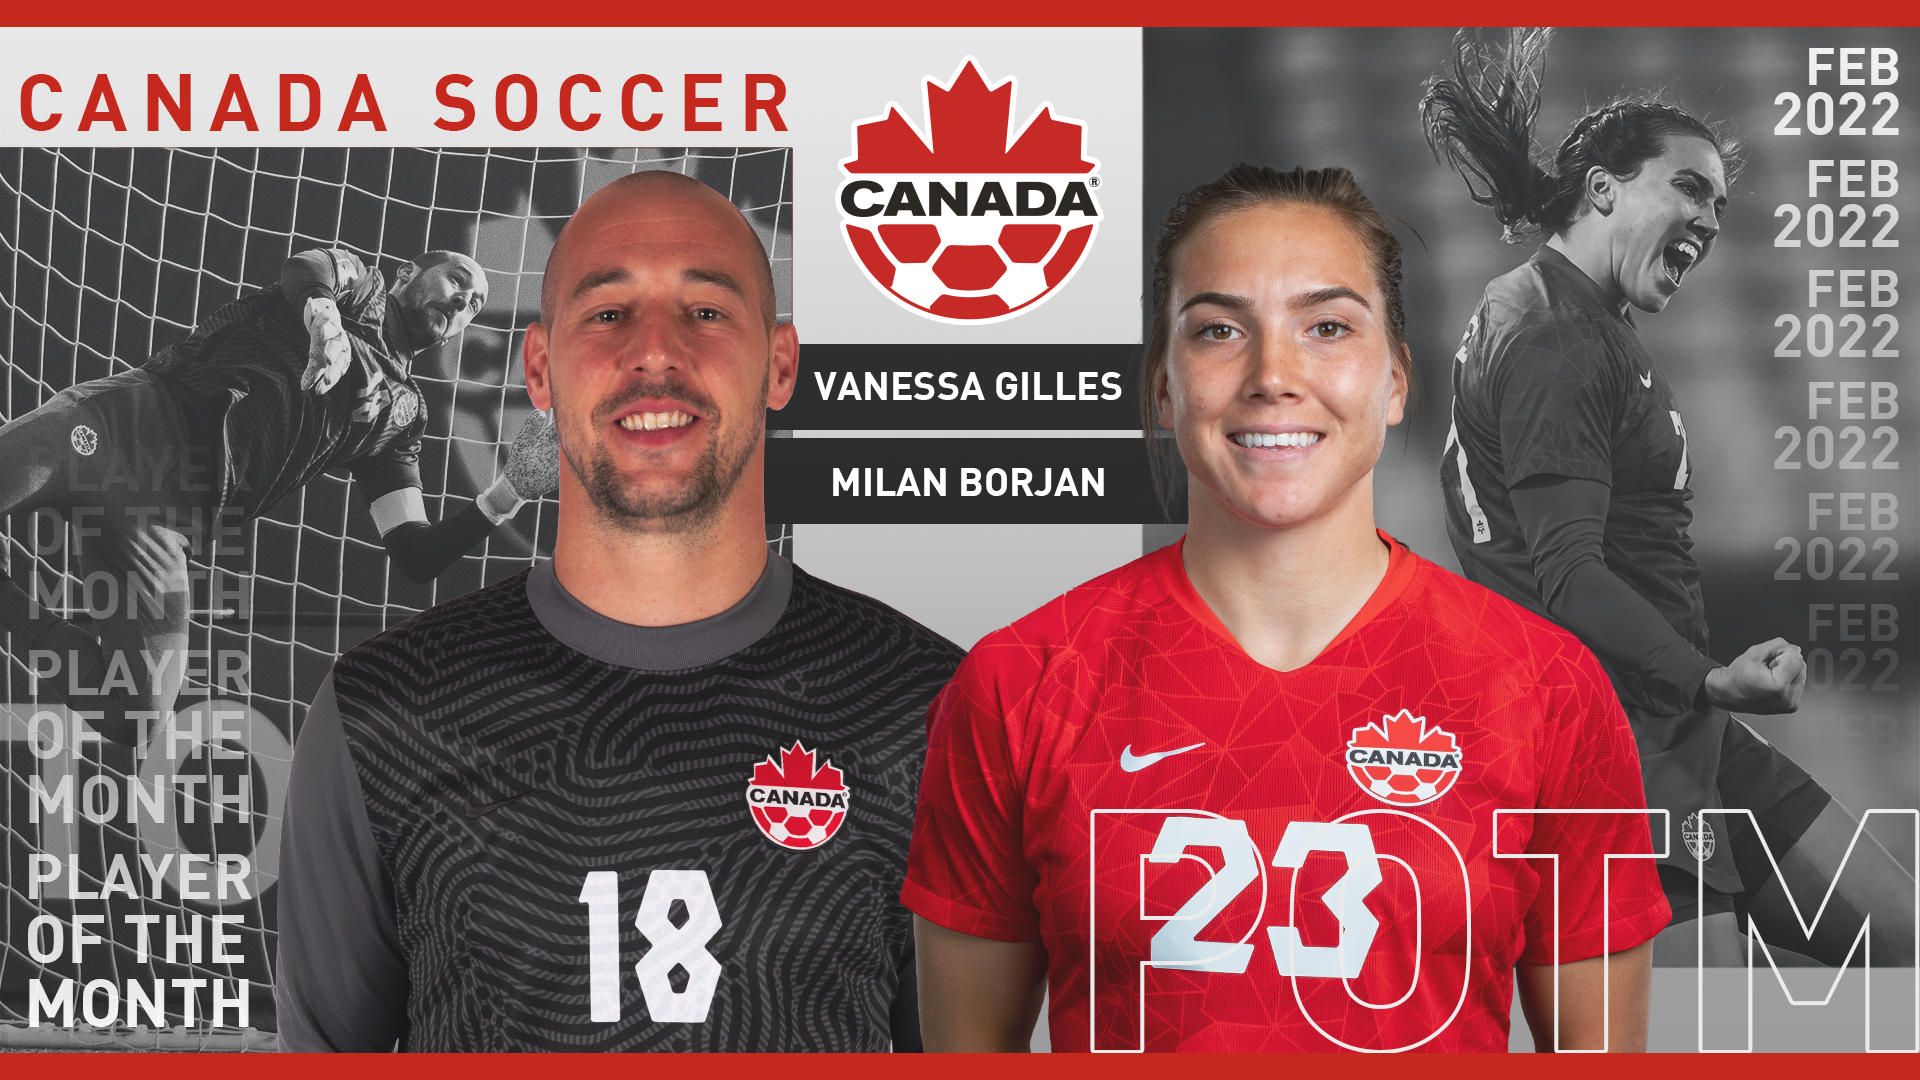 Milan Borjan and Vanessa Gilles named Canada Soccer’s Players of the Month